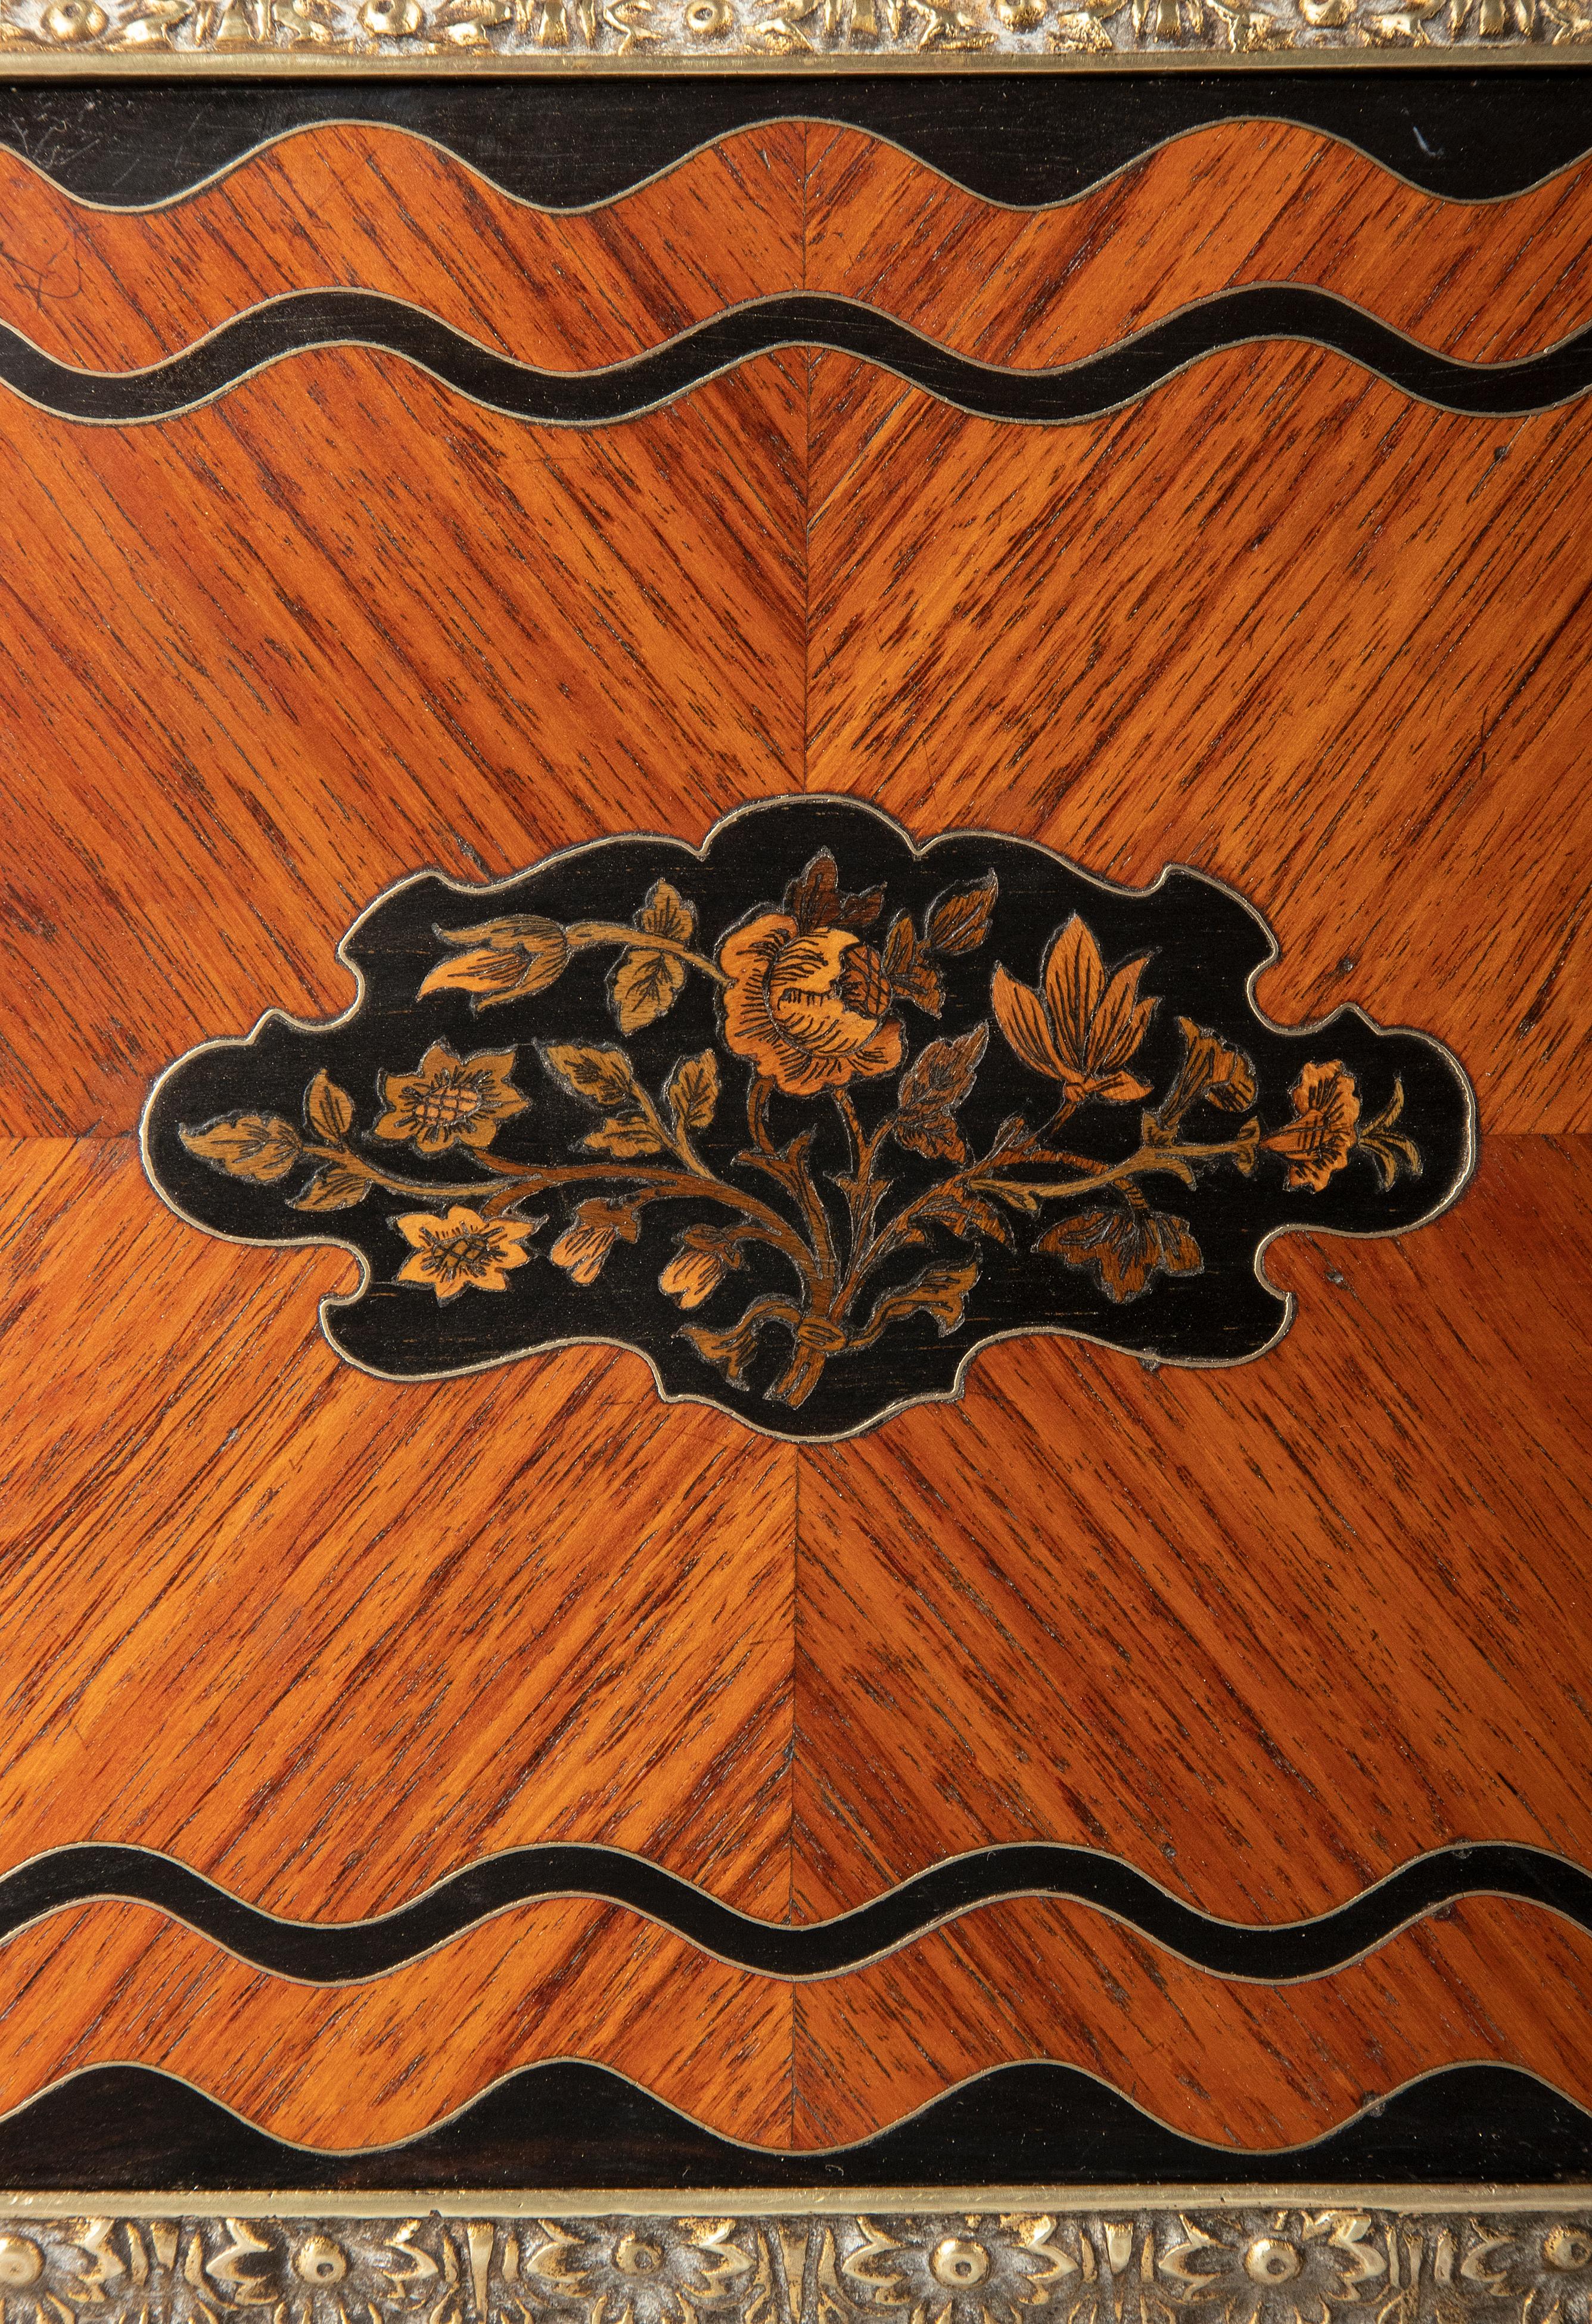 Hand-Crafted 19th Century Napoleon III Wood Marquetry Teacaddy For Sale